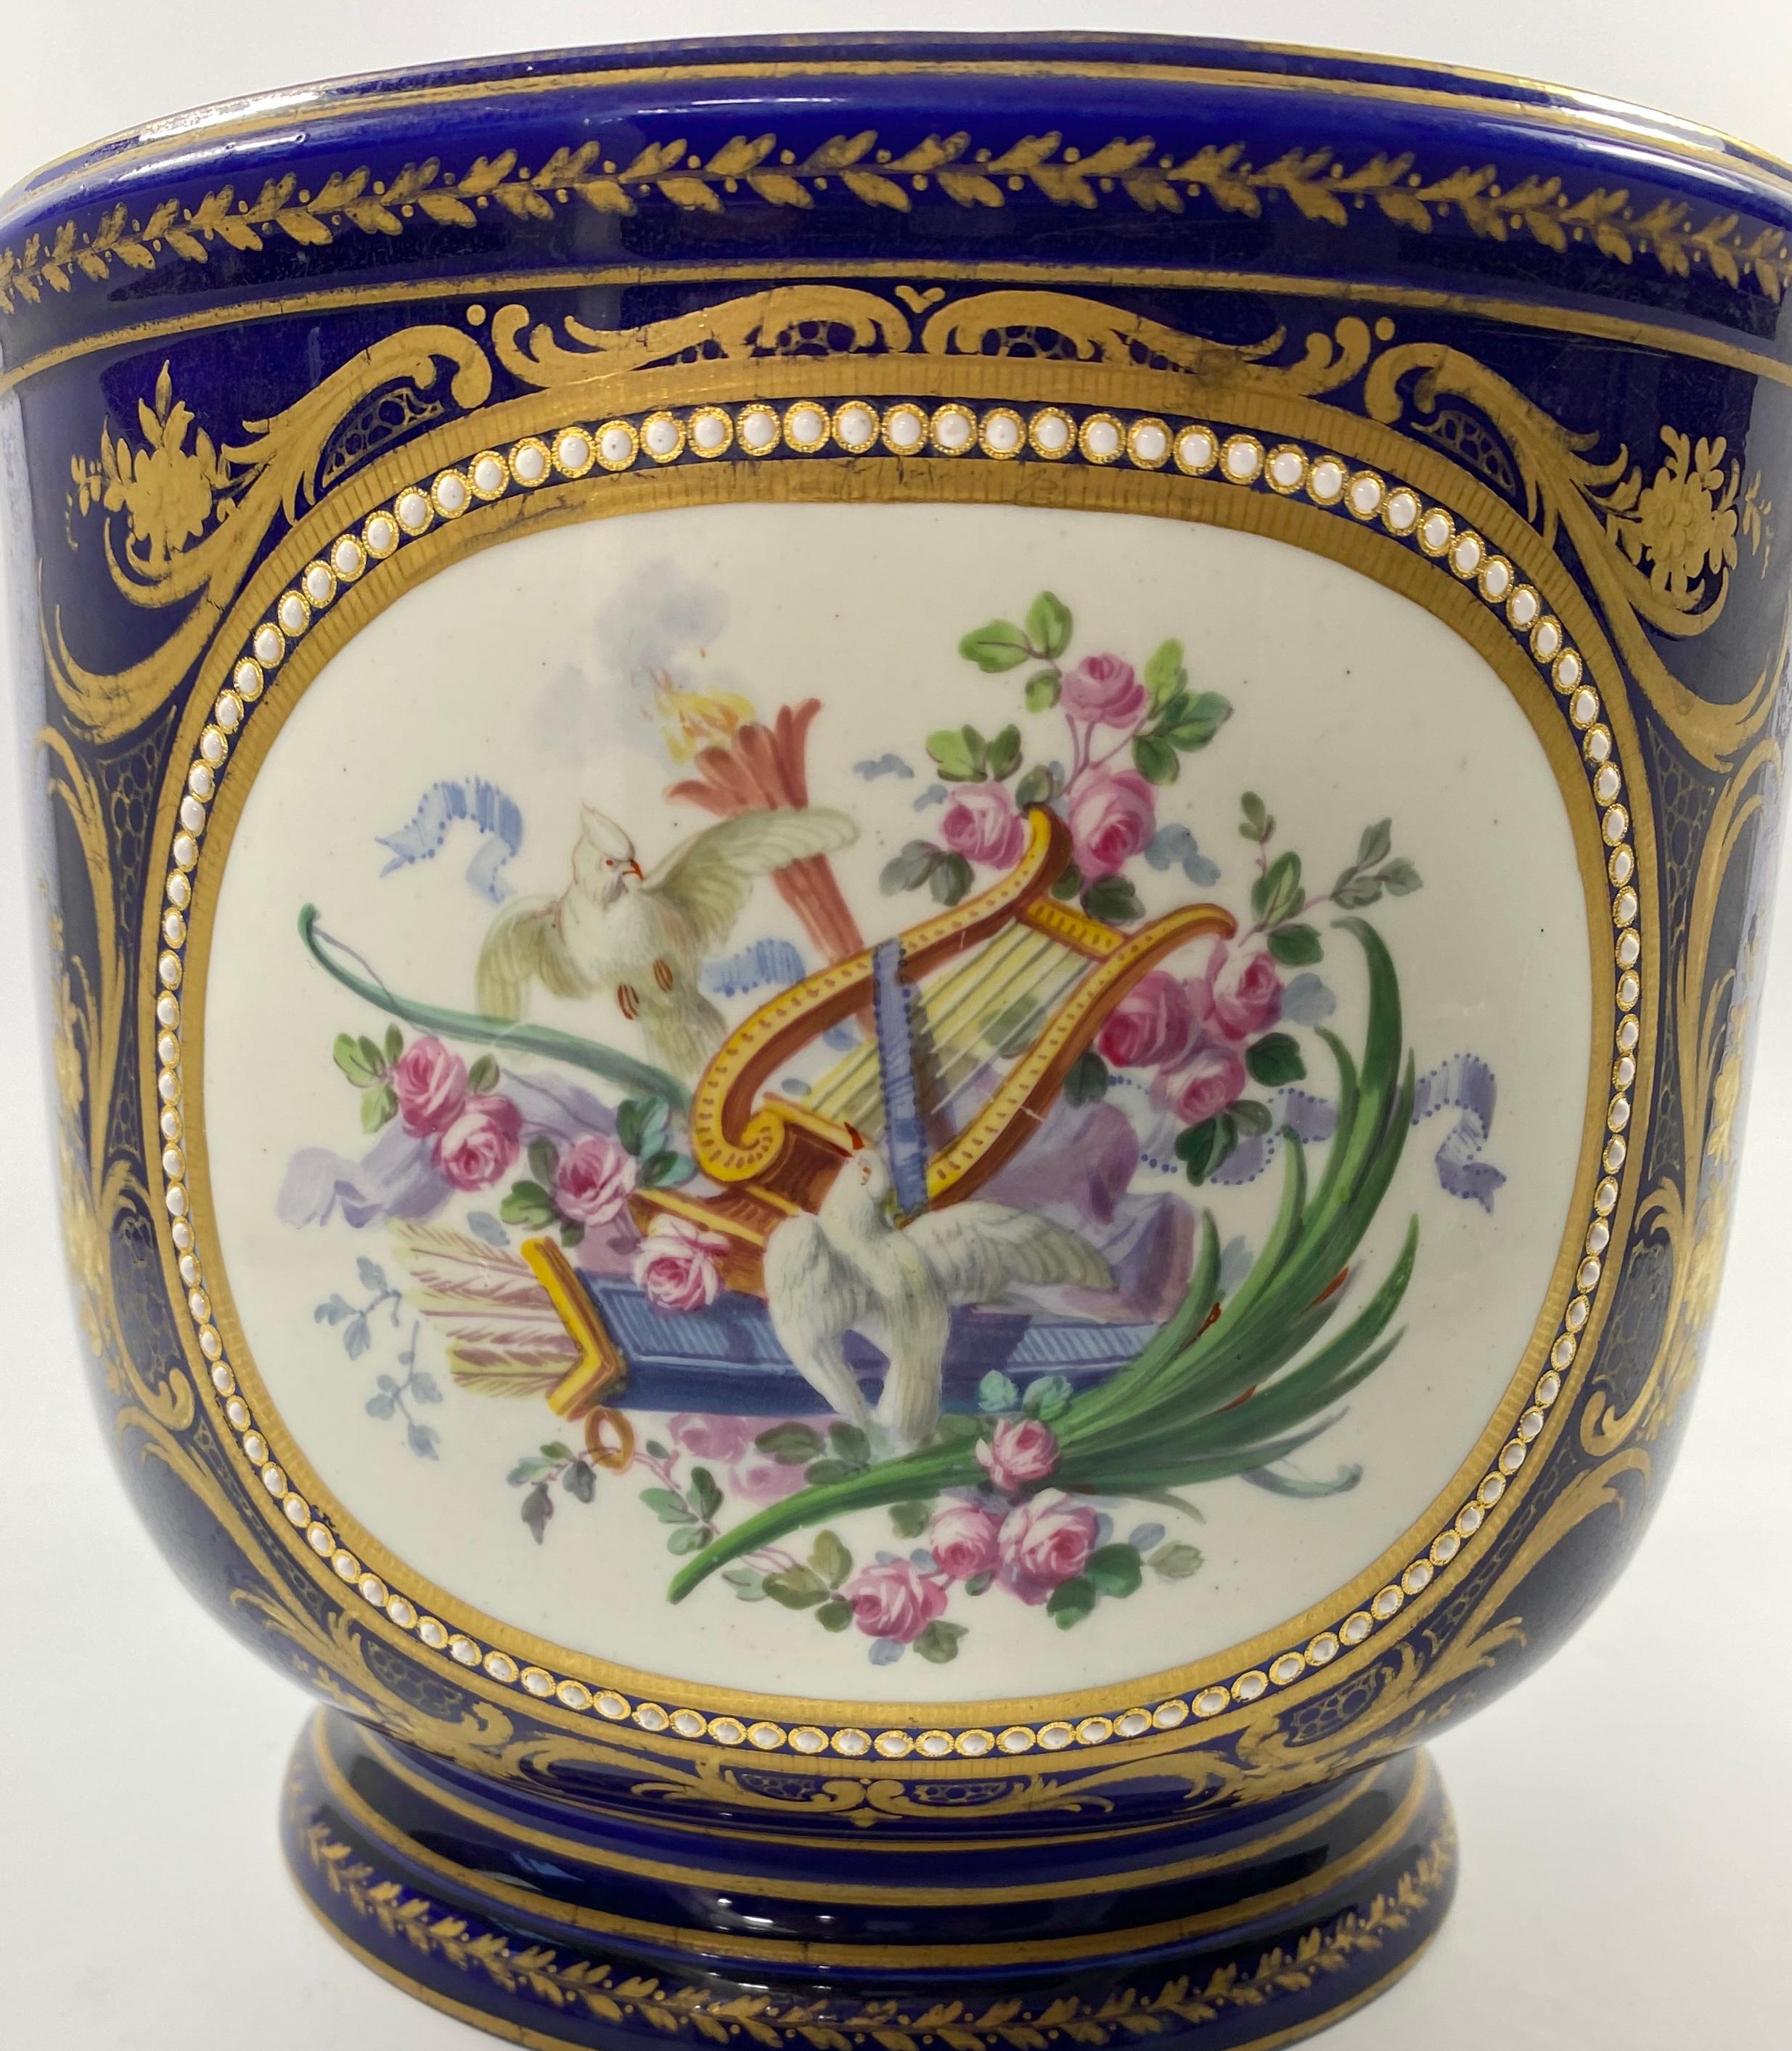 Fired ‘Sevres’ Porcelain Jewelled Cache Pot, c. 1870